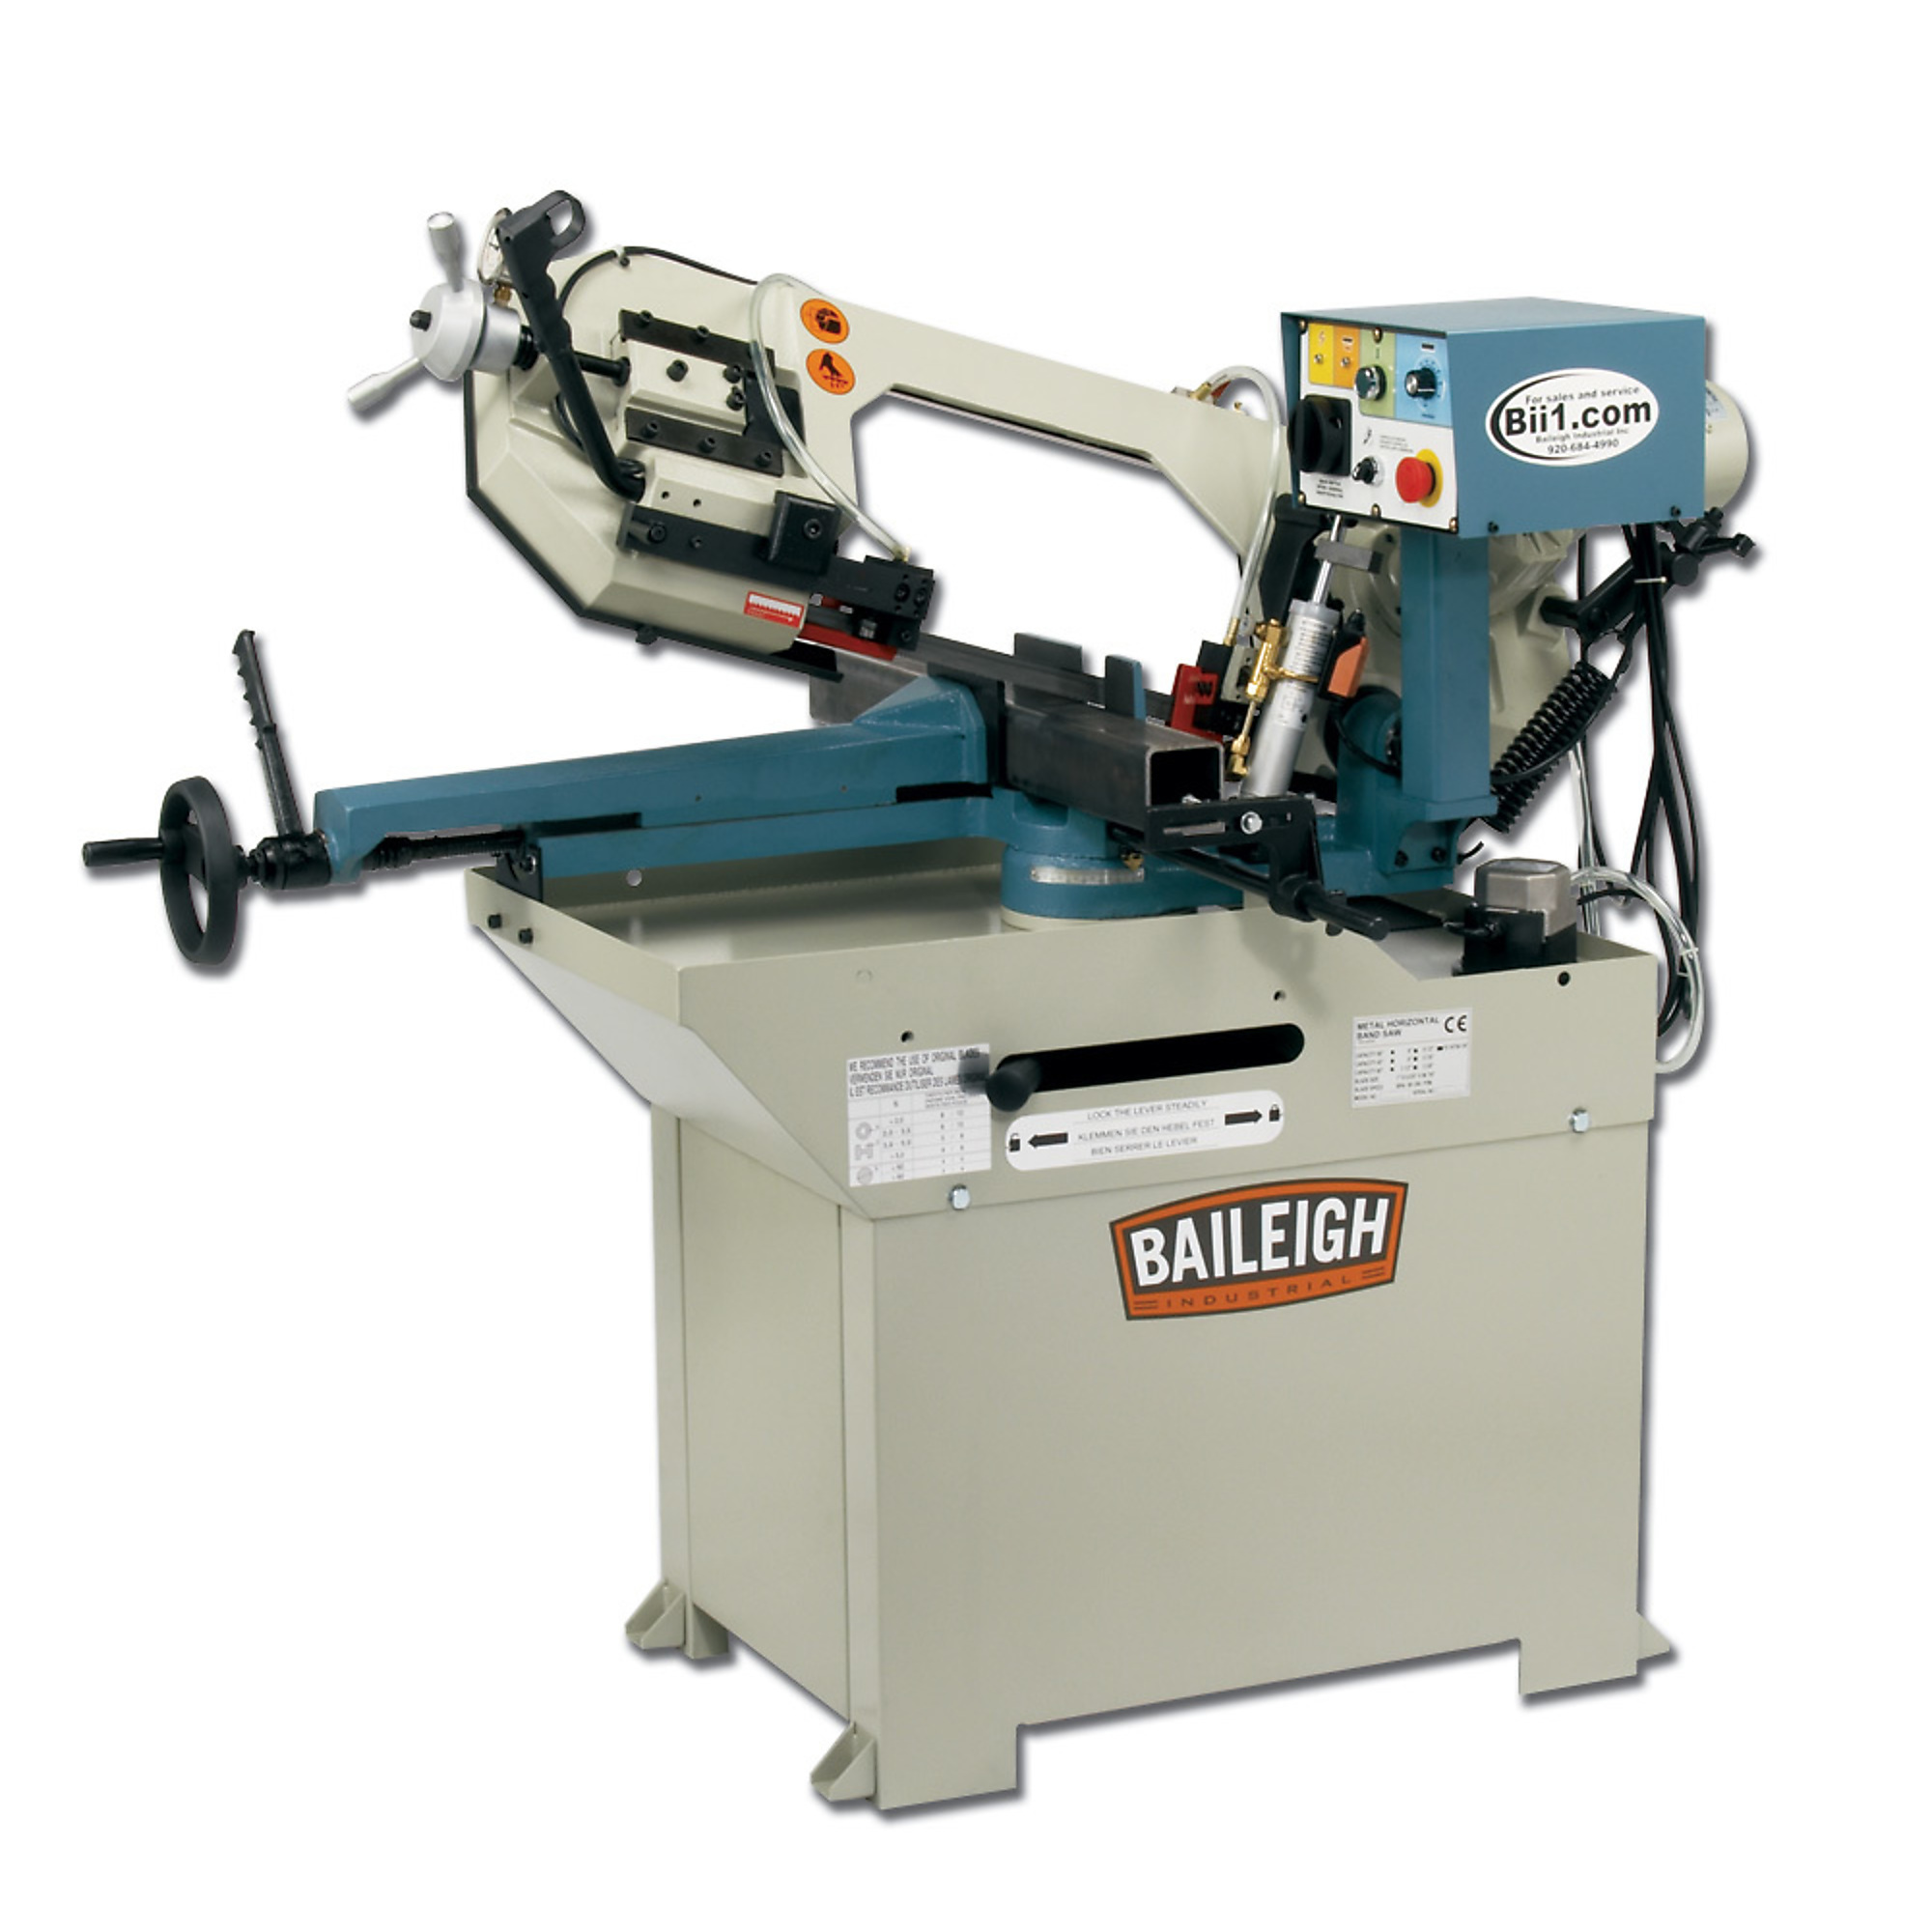 Baileigh Metal Cutting Band Saw, Mitering Head, 2 HP, Volts 110, Model BS-250M -  1001396